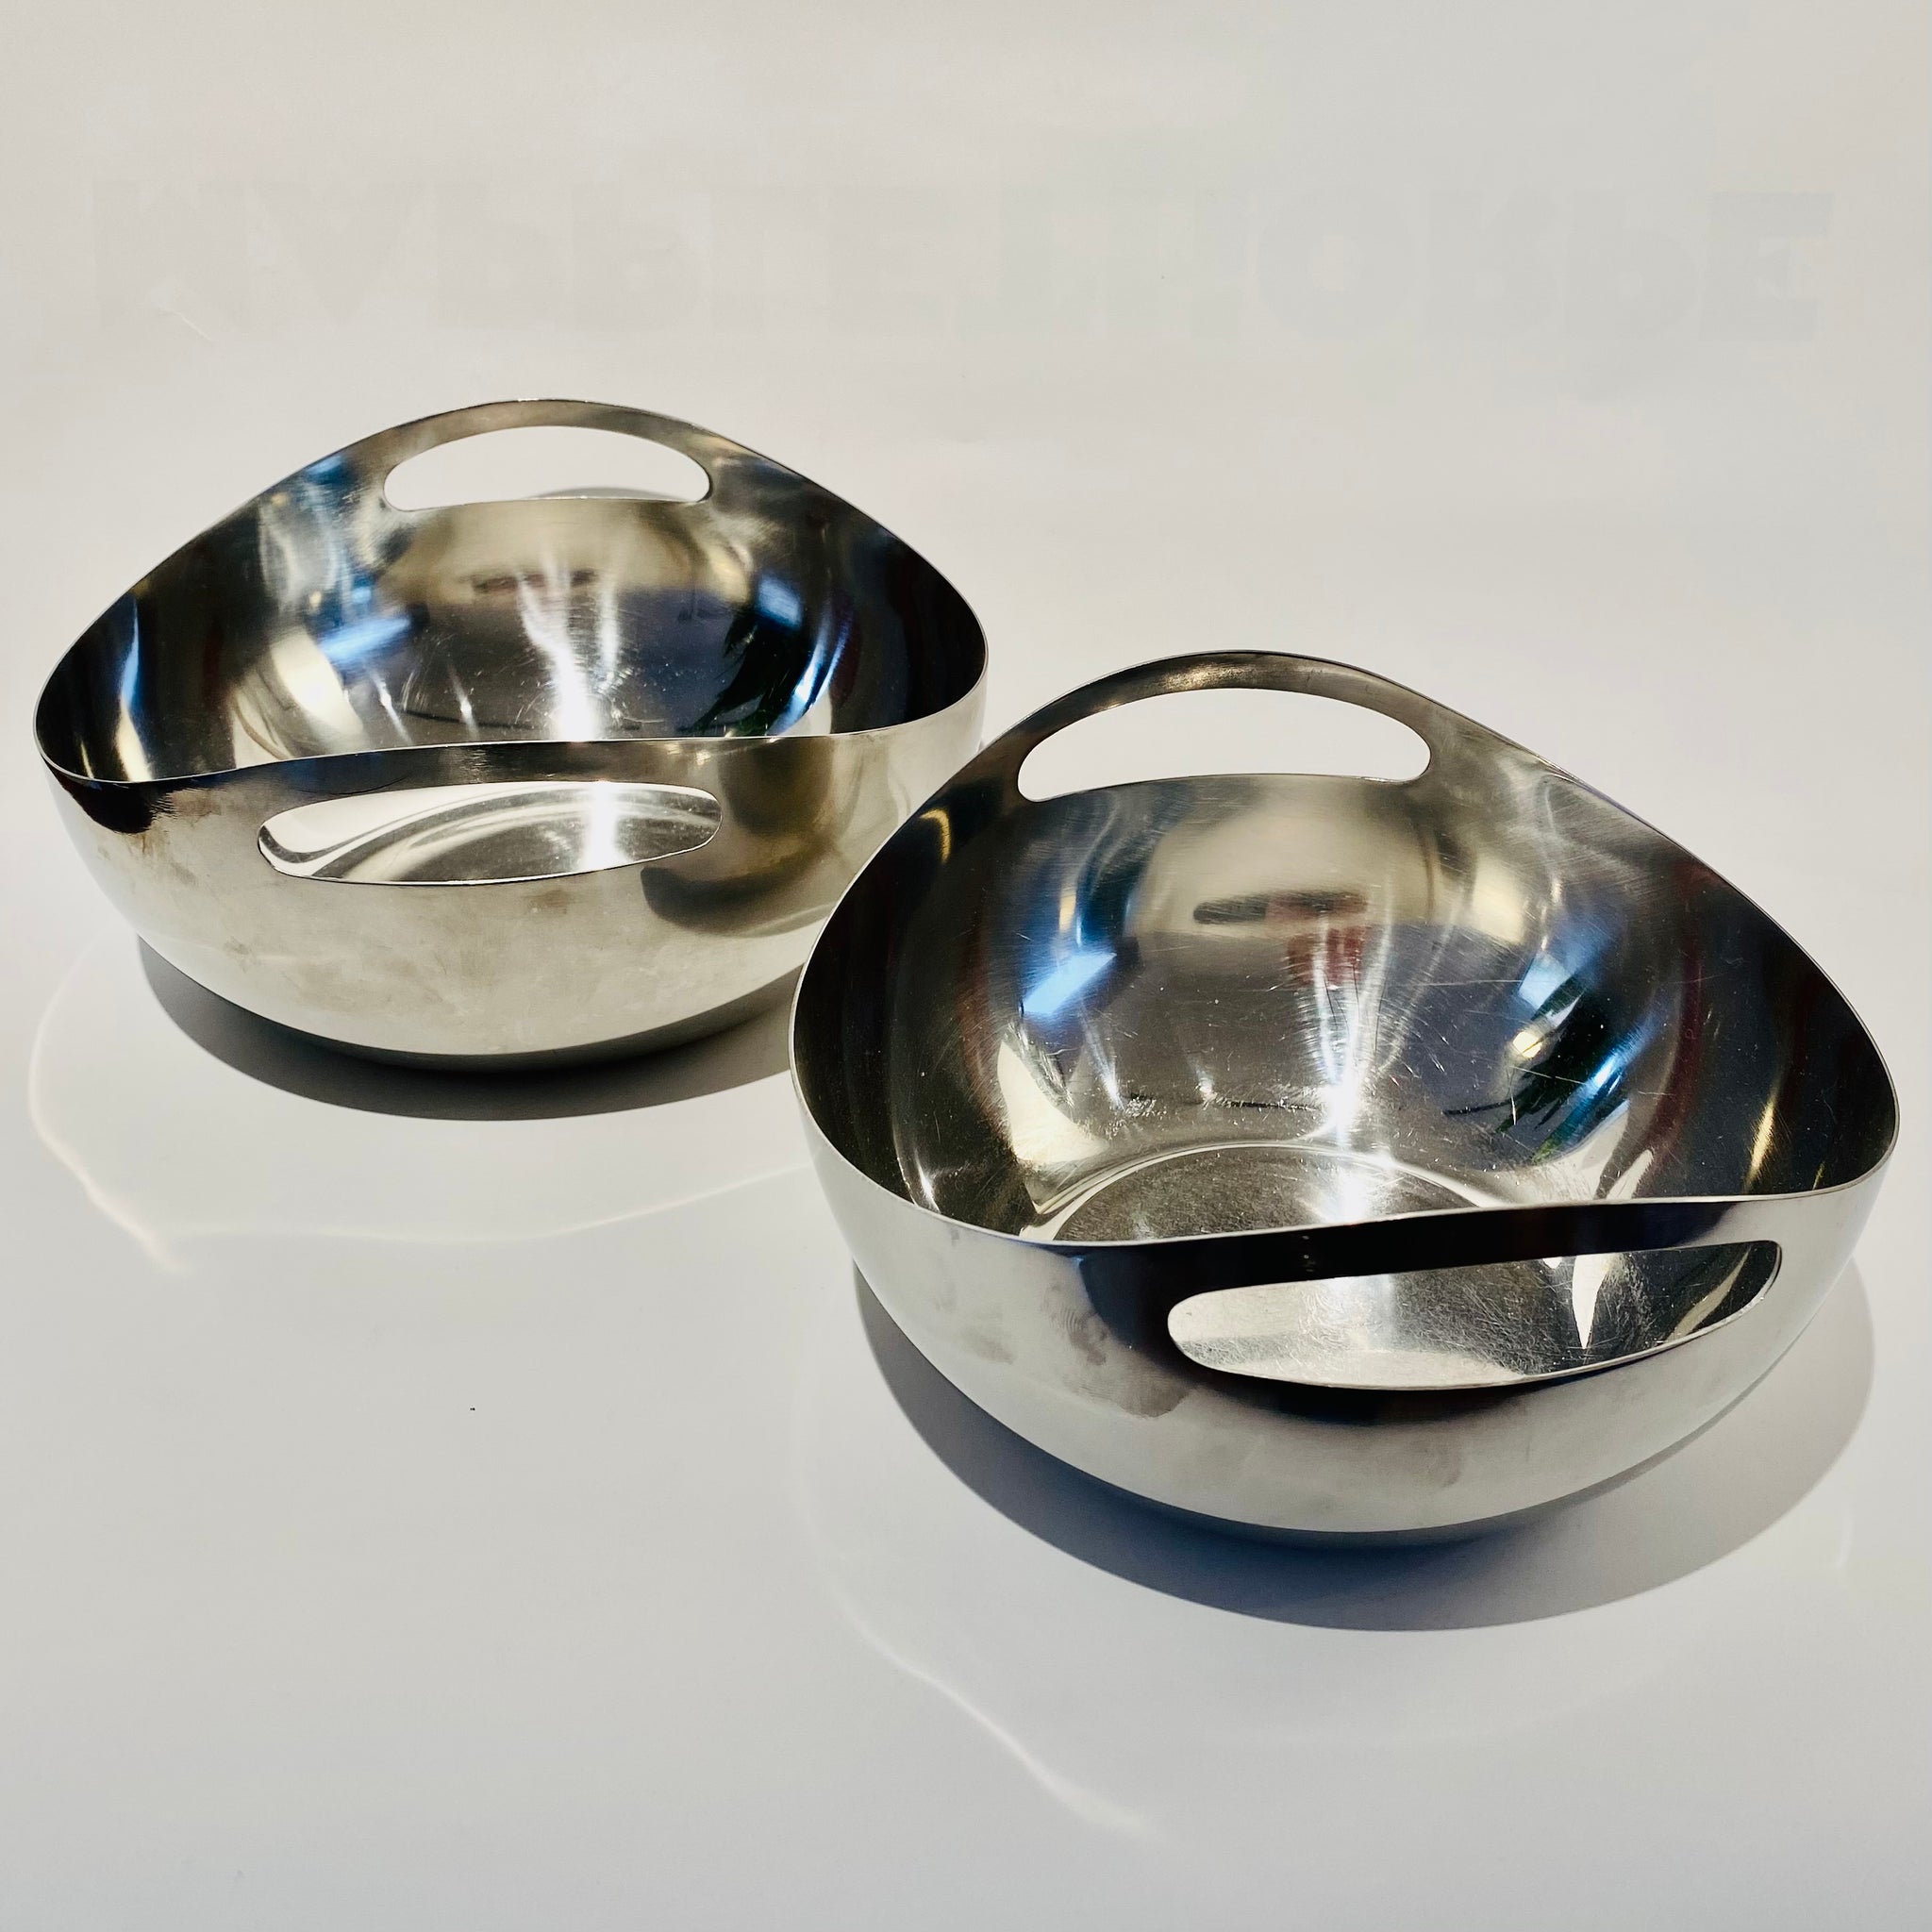 2 Wiskeman 'Country' bowls